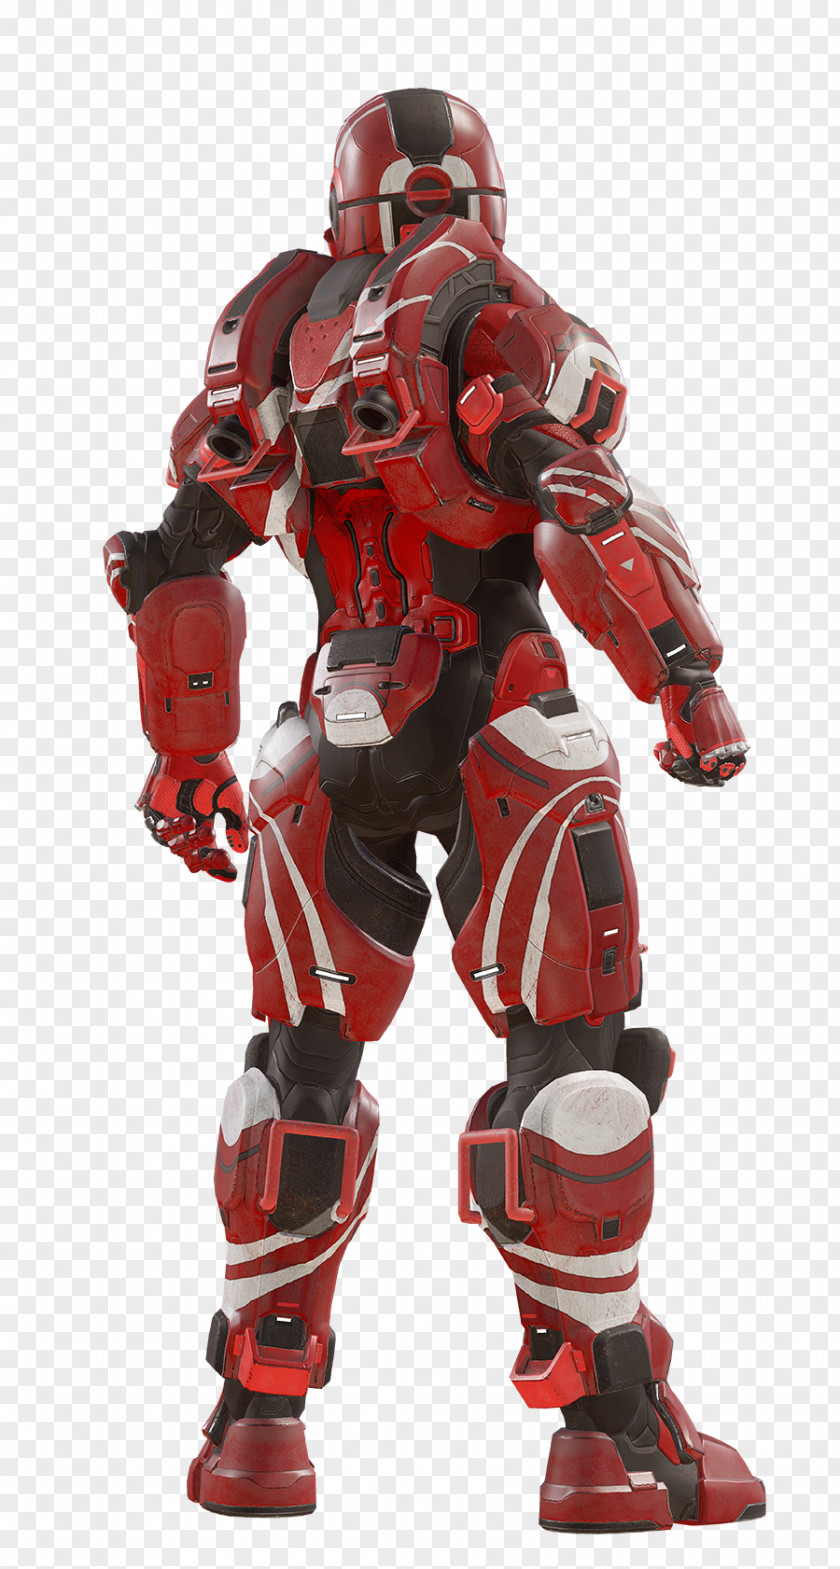 Armour Halo 5: Guardians 4 Master Chief Halo: Reach PNG